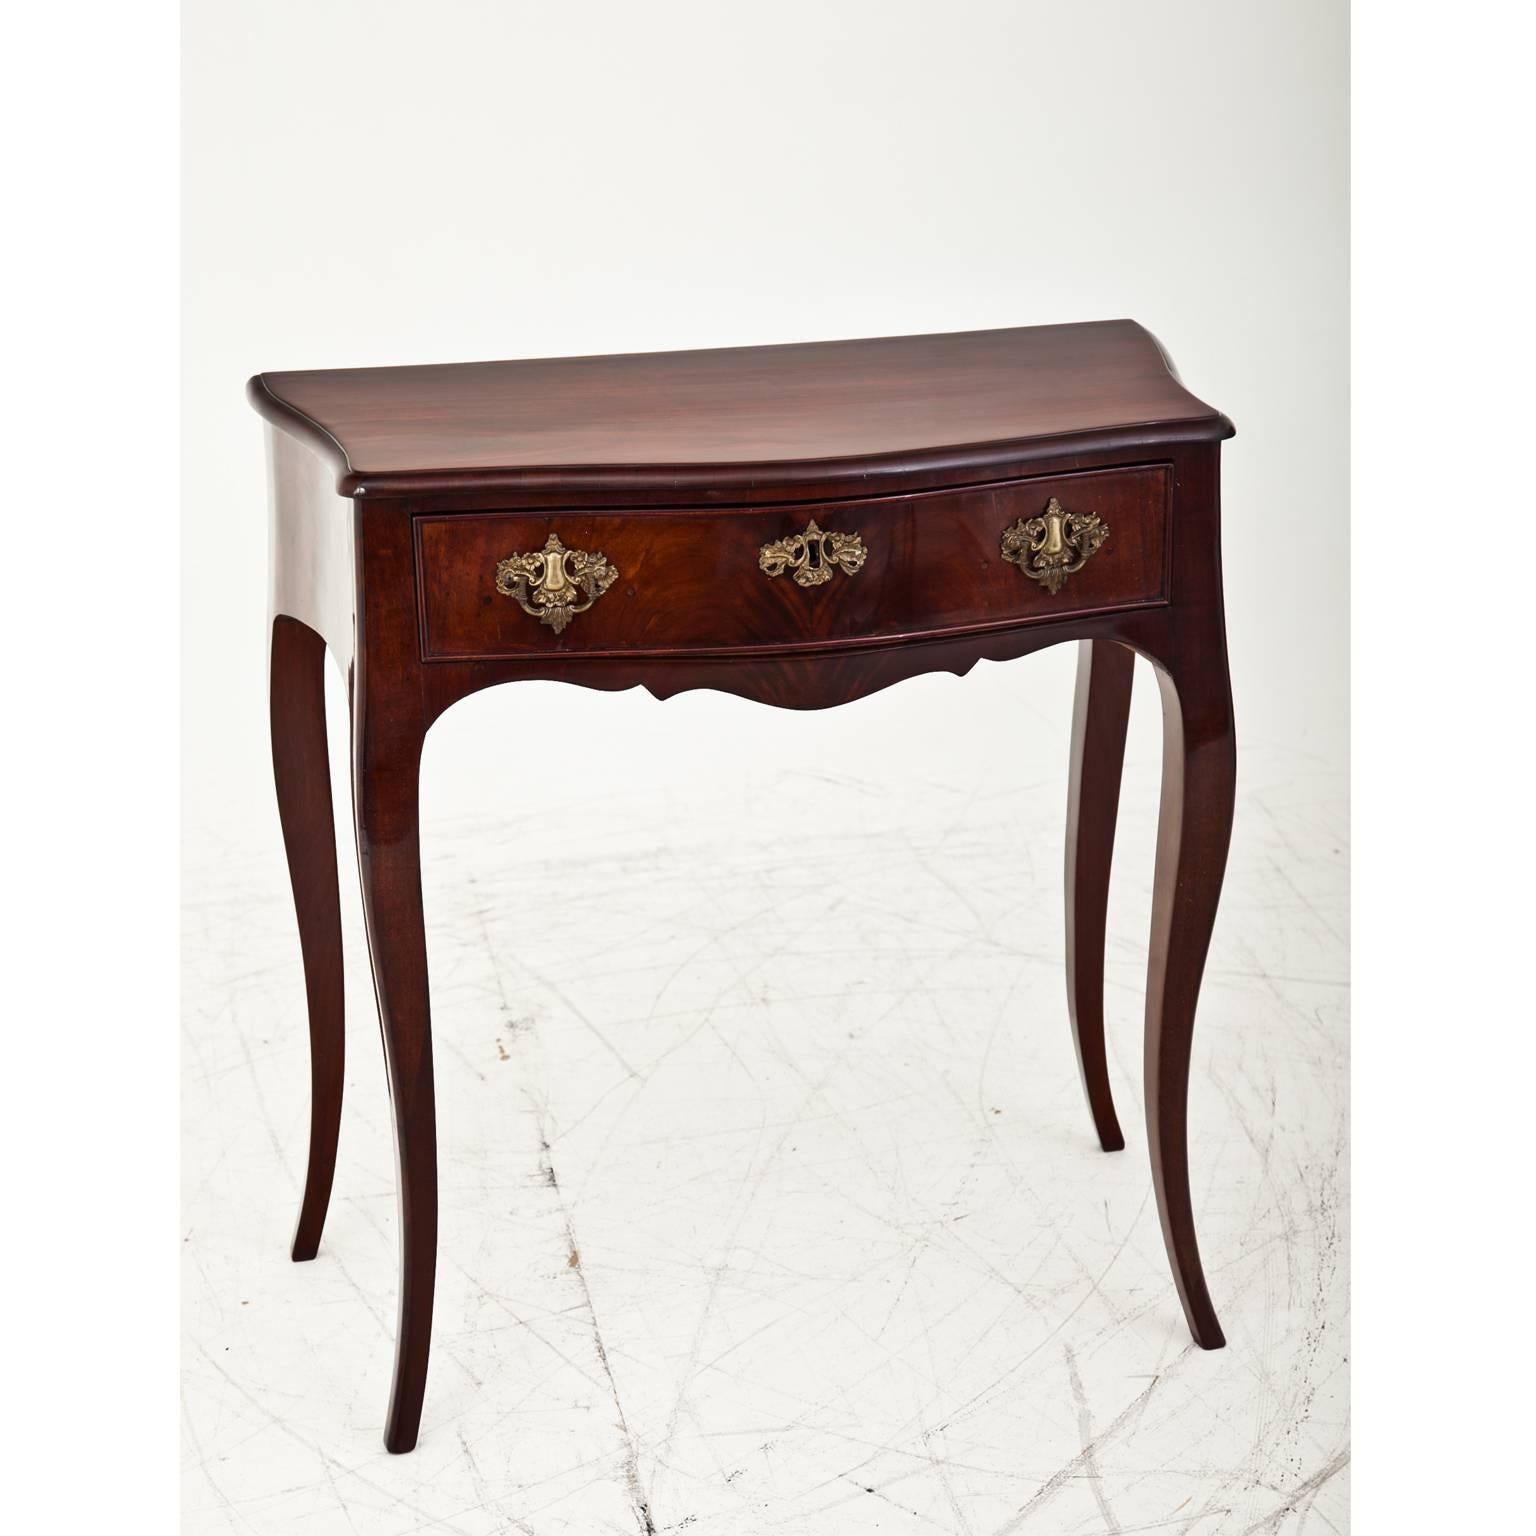 One-drawer Louis Quinze console table on S-shaped elegant legs and cut-out frame. The front and sides have a slight serpentine shape.